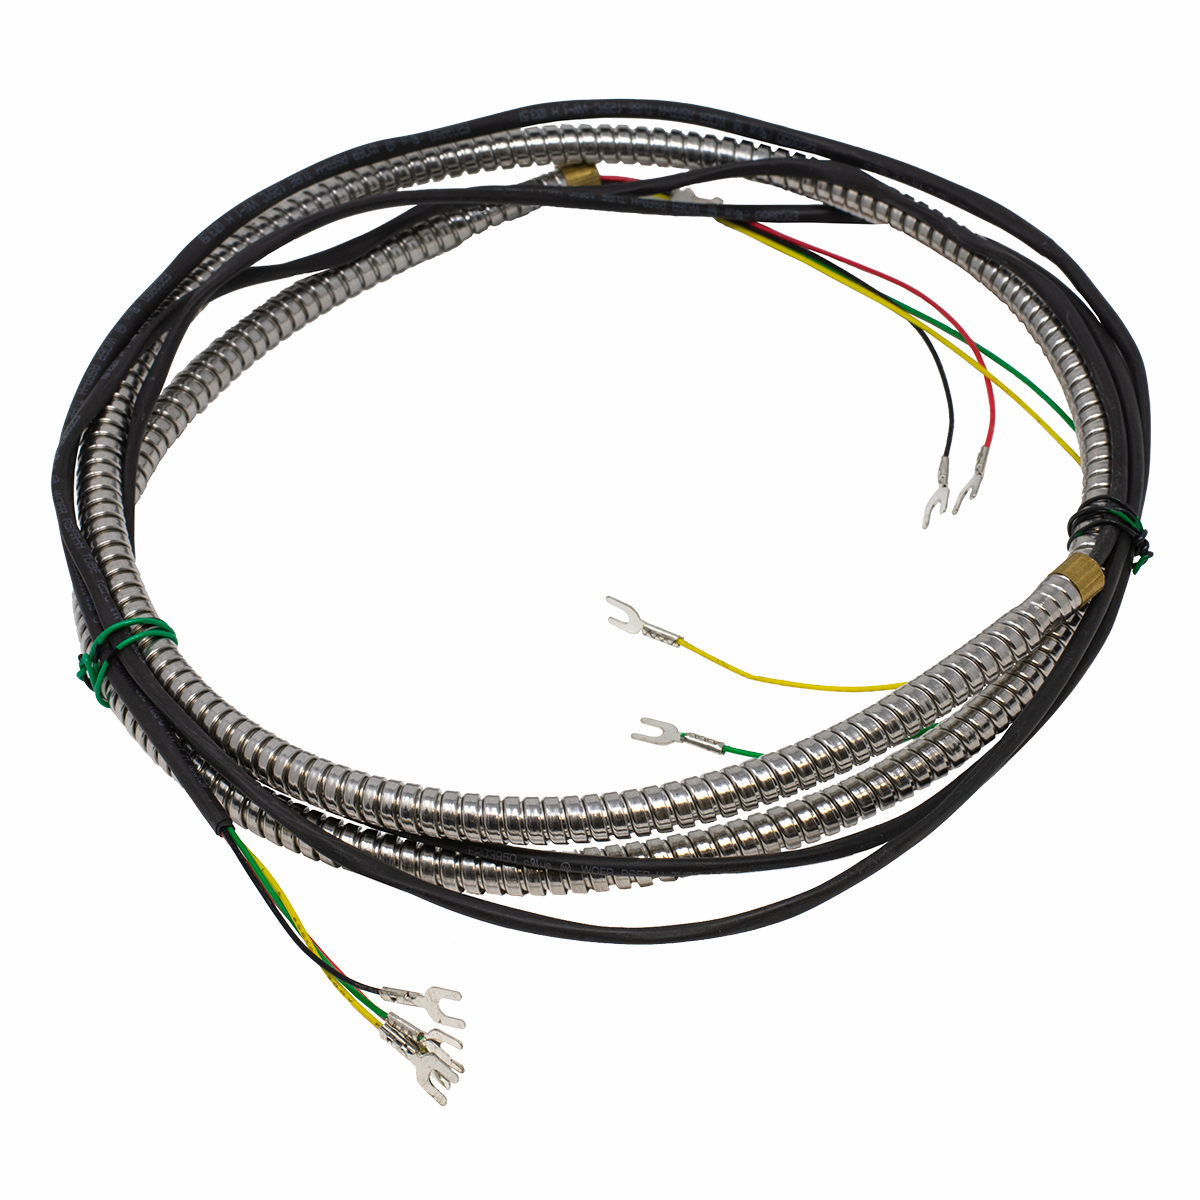 3' Armored Handset Cord 5' Wires